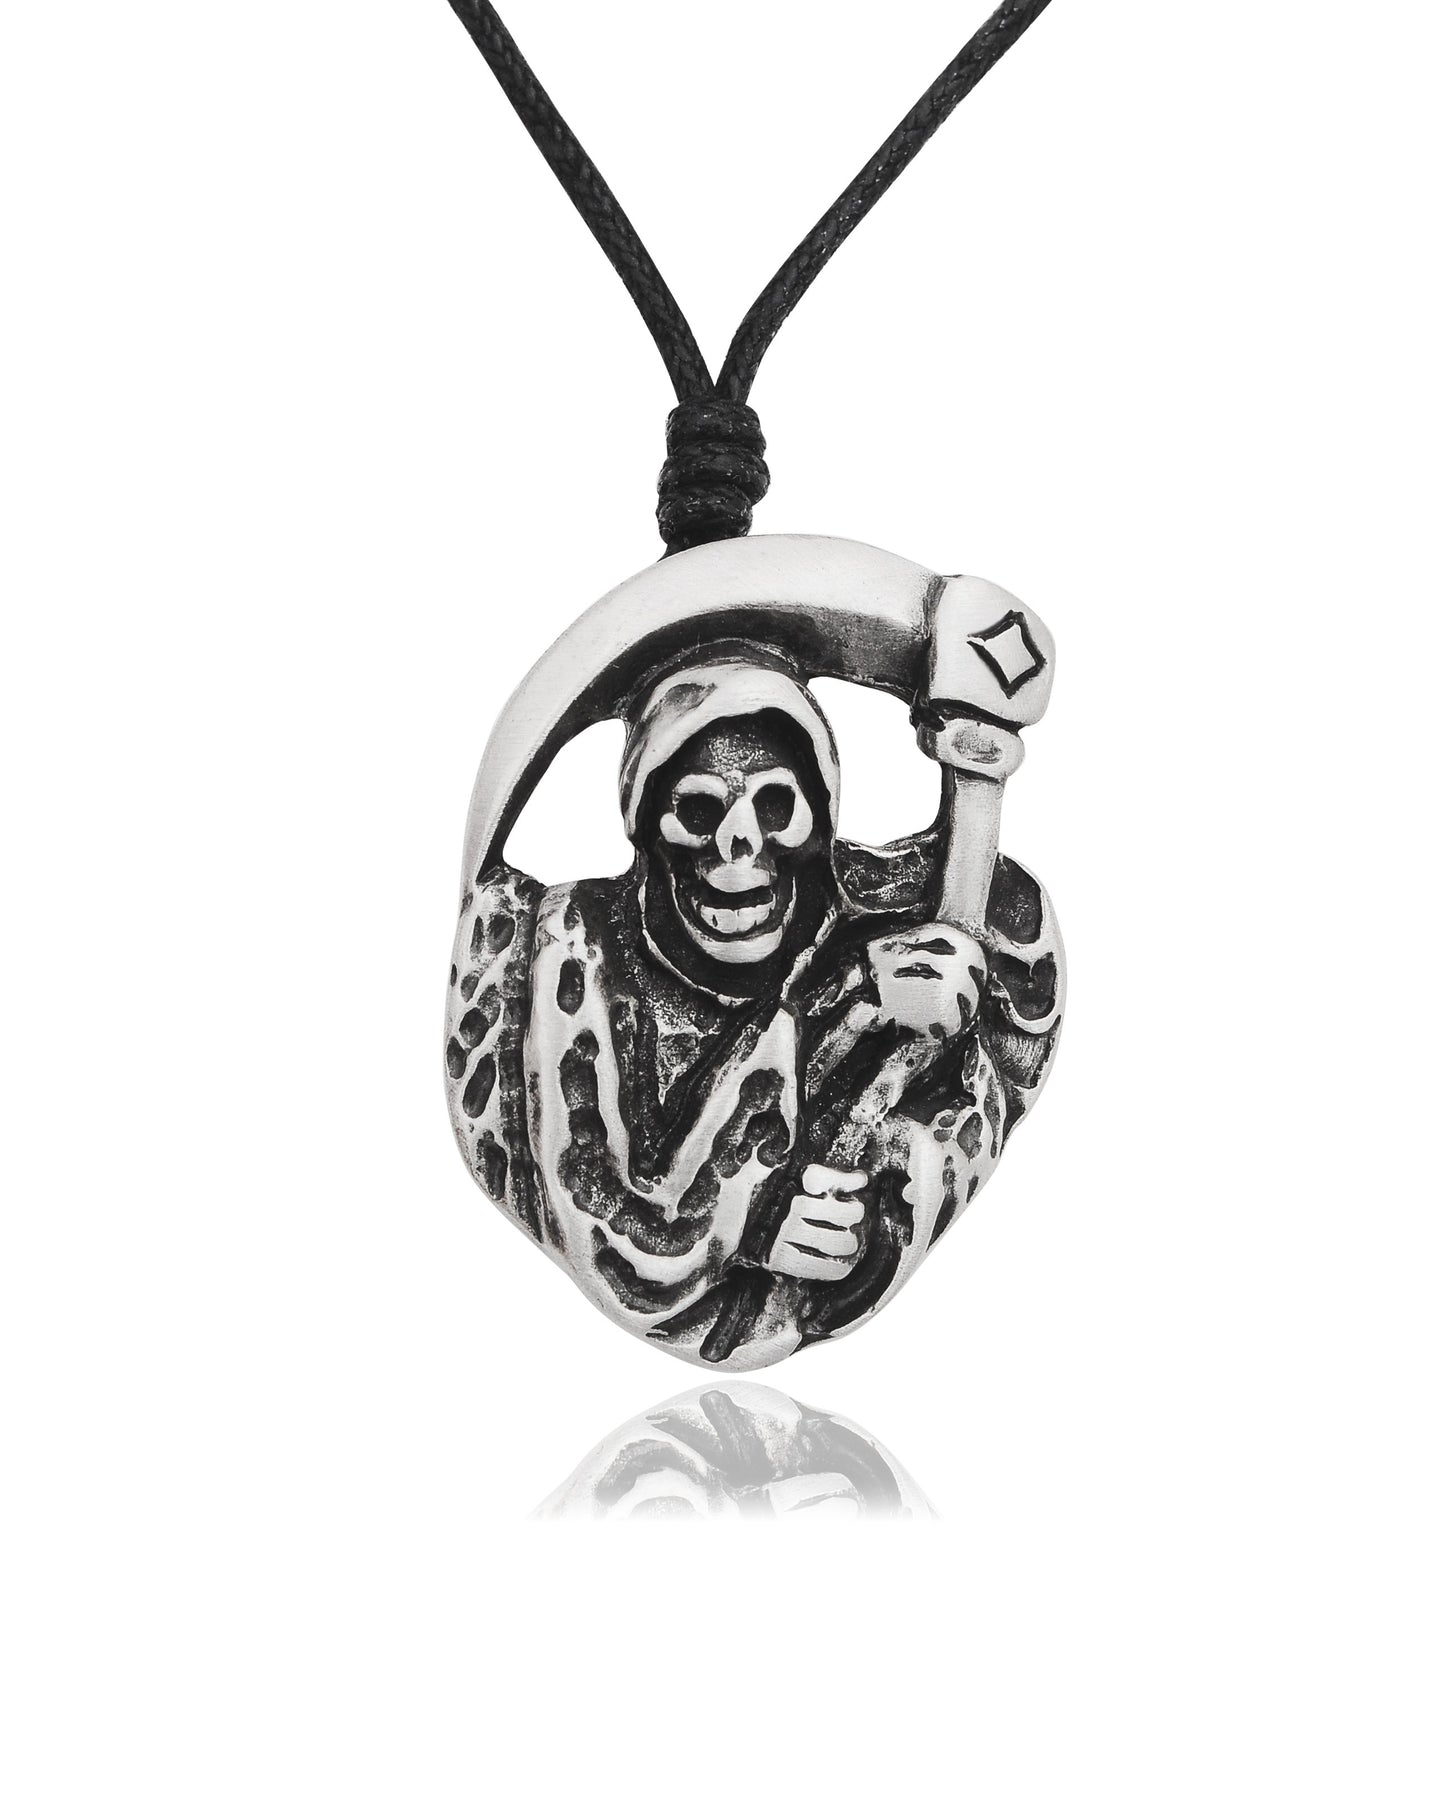 Grim Reaper Silver Pewter Charm Necklace Pendant Jewelry